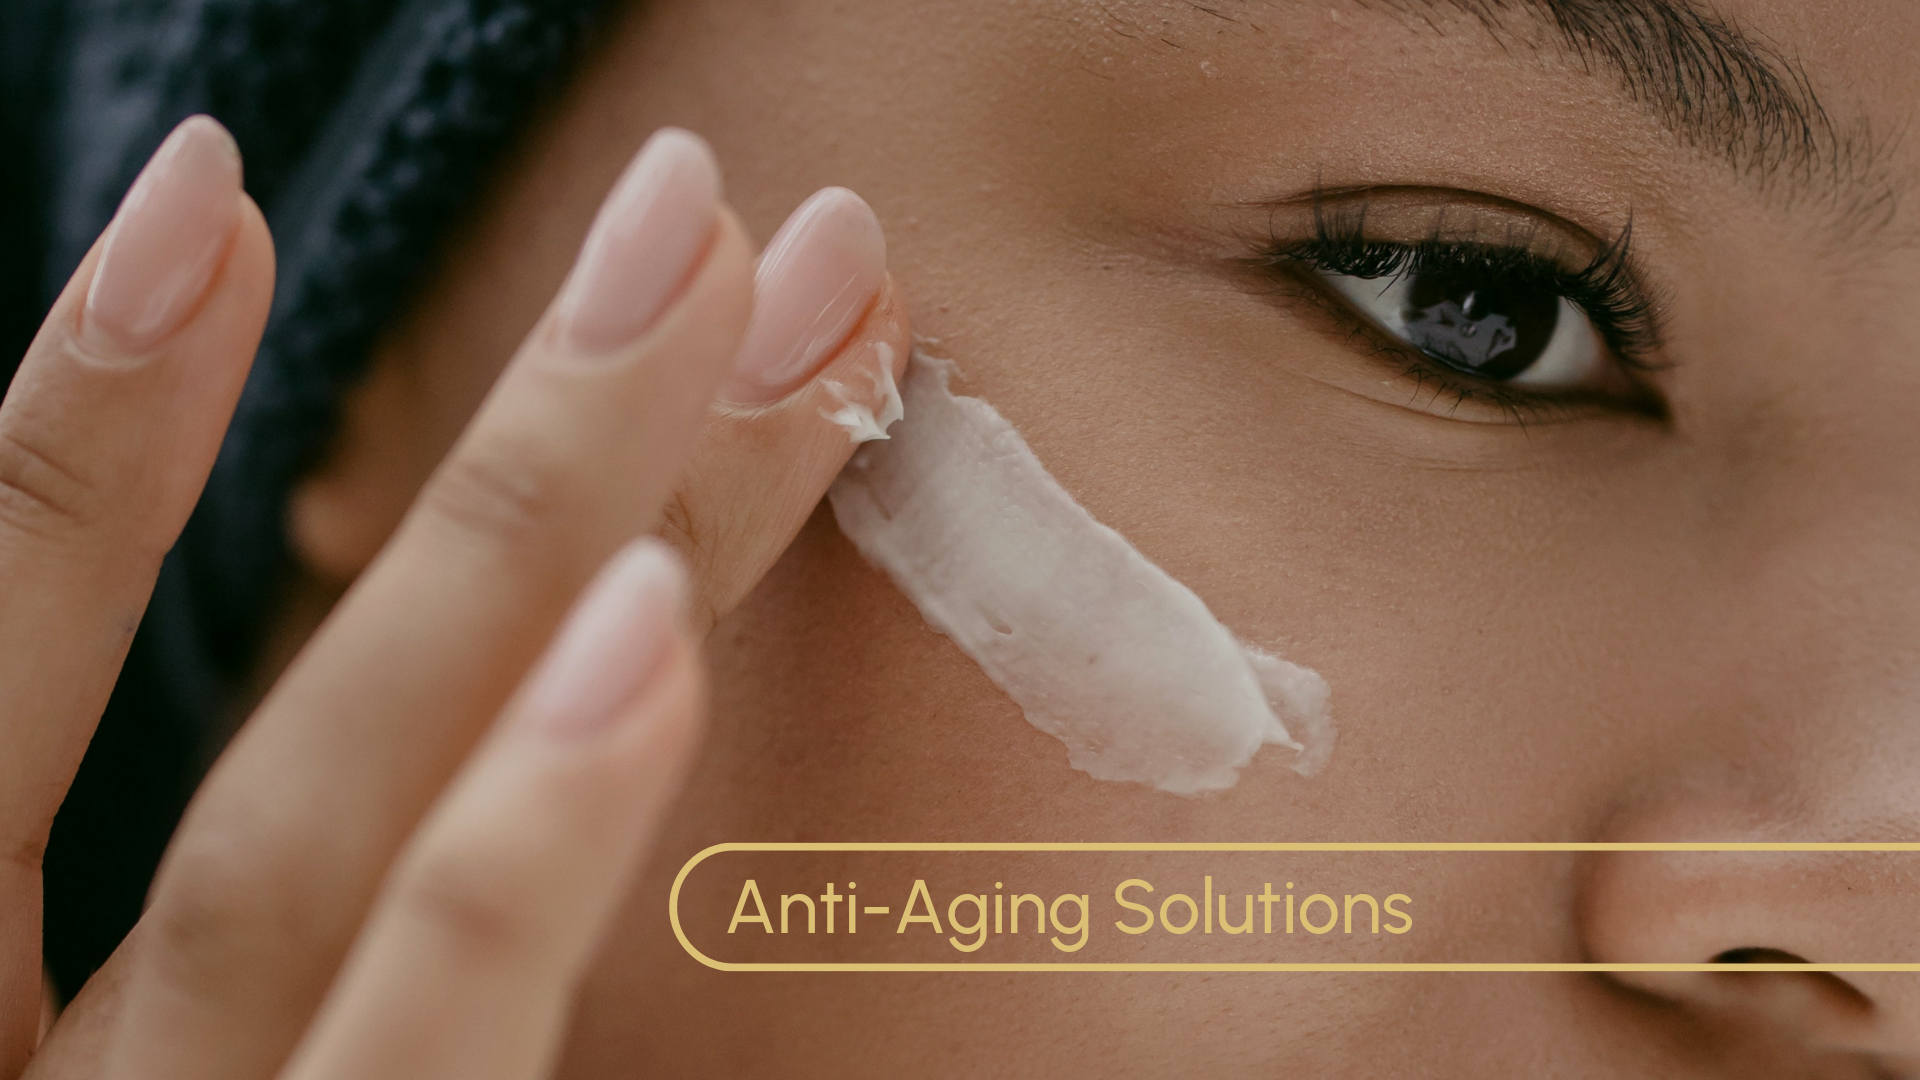 How To Treat Aging Skin: Get To Know Anti-Aging Skincare Solutions